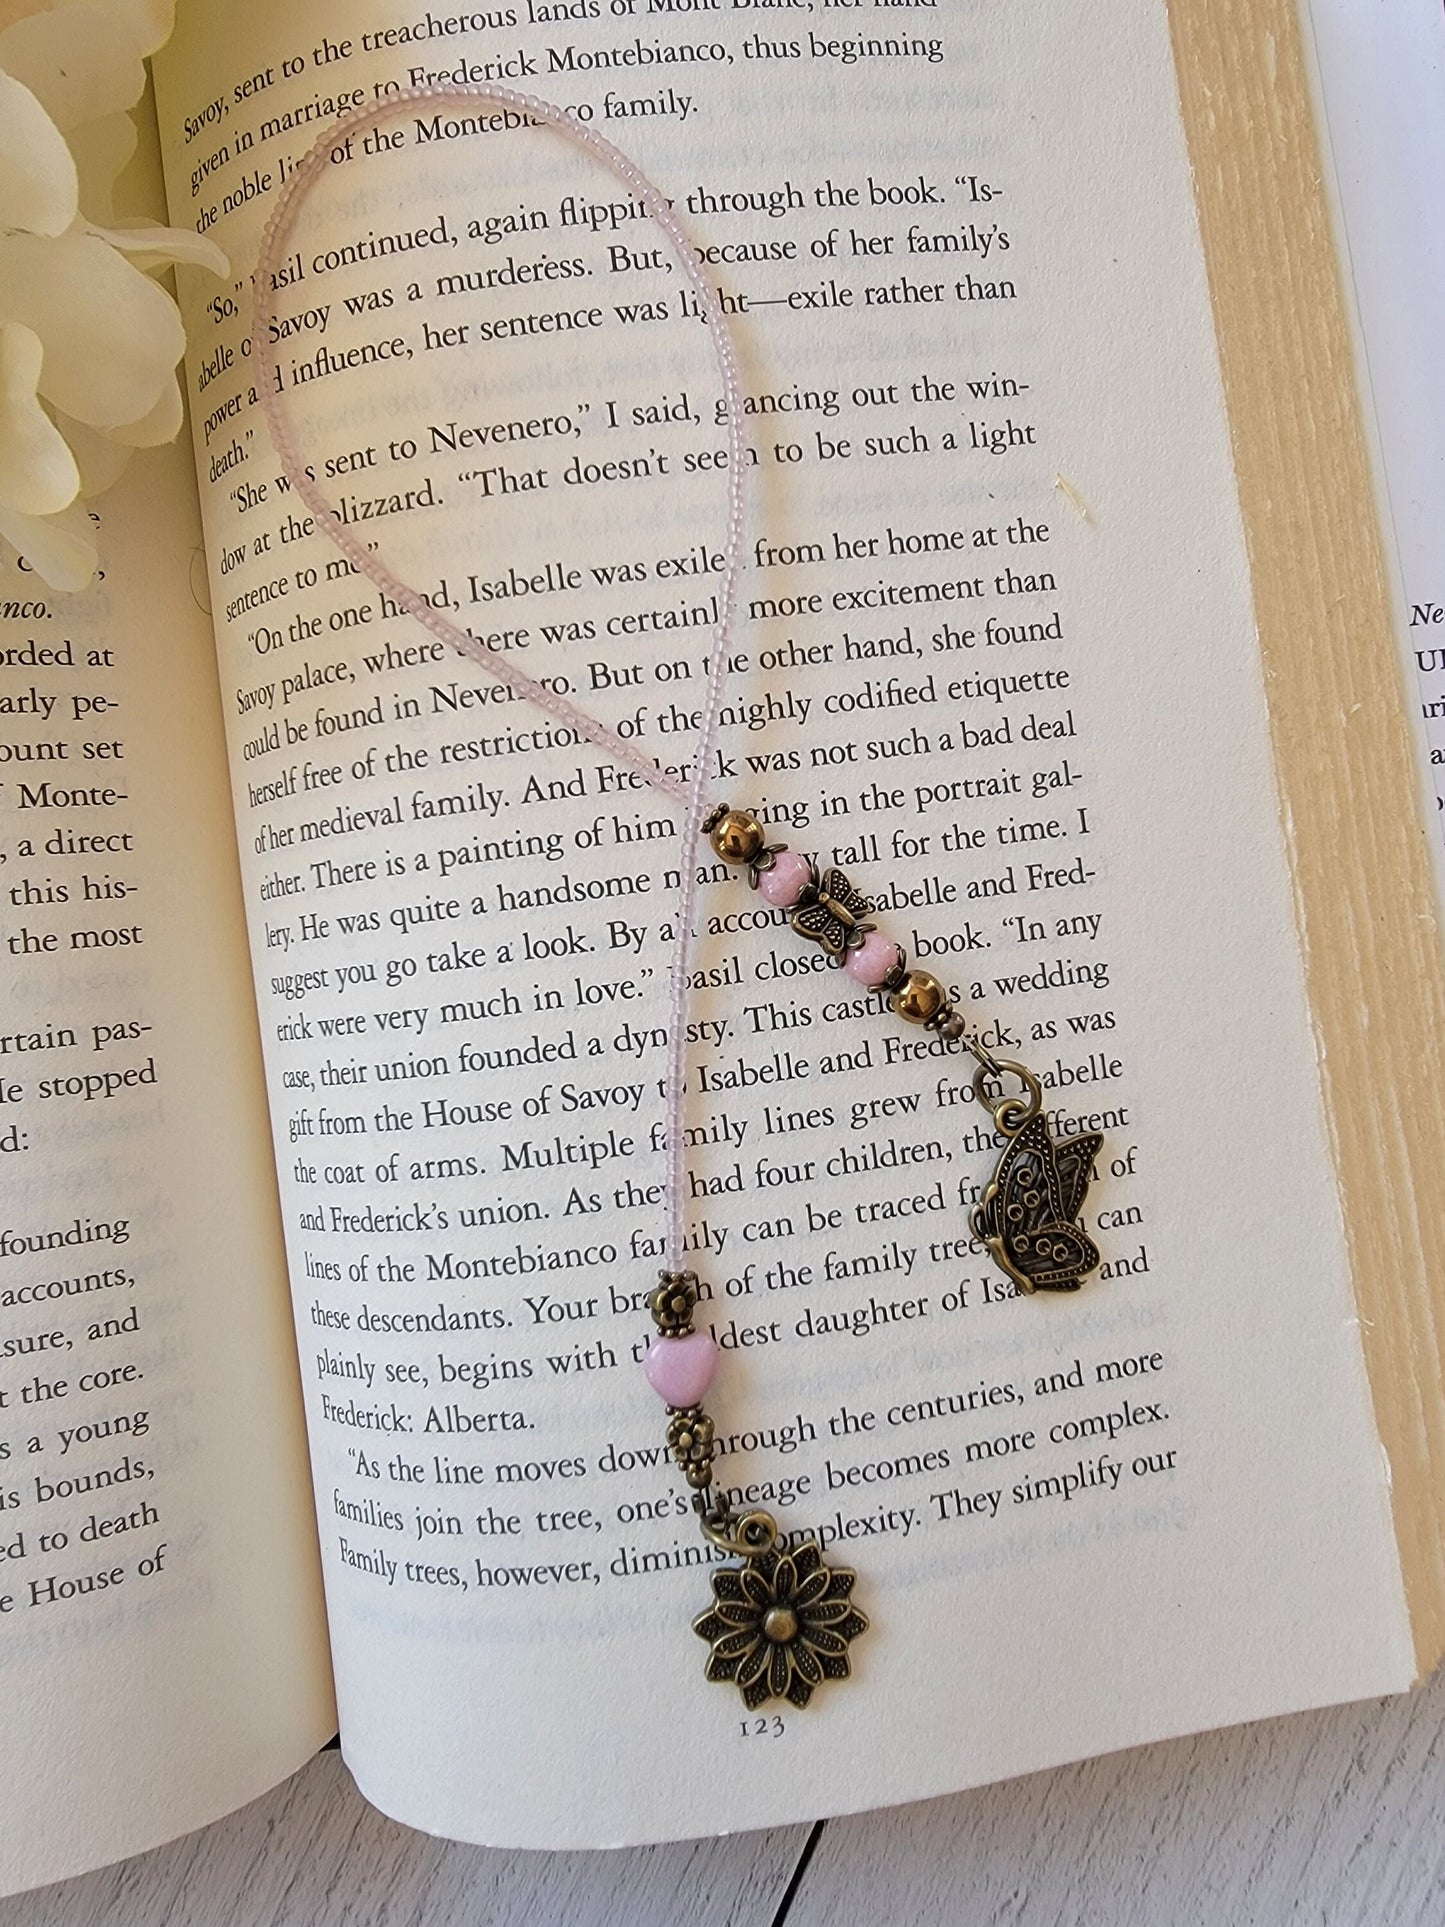 Whimsical Beaded Bookmark with Butterfly and Flower Charms - Handcrafted Pink Heart Accent